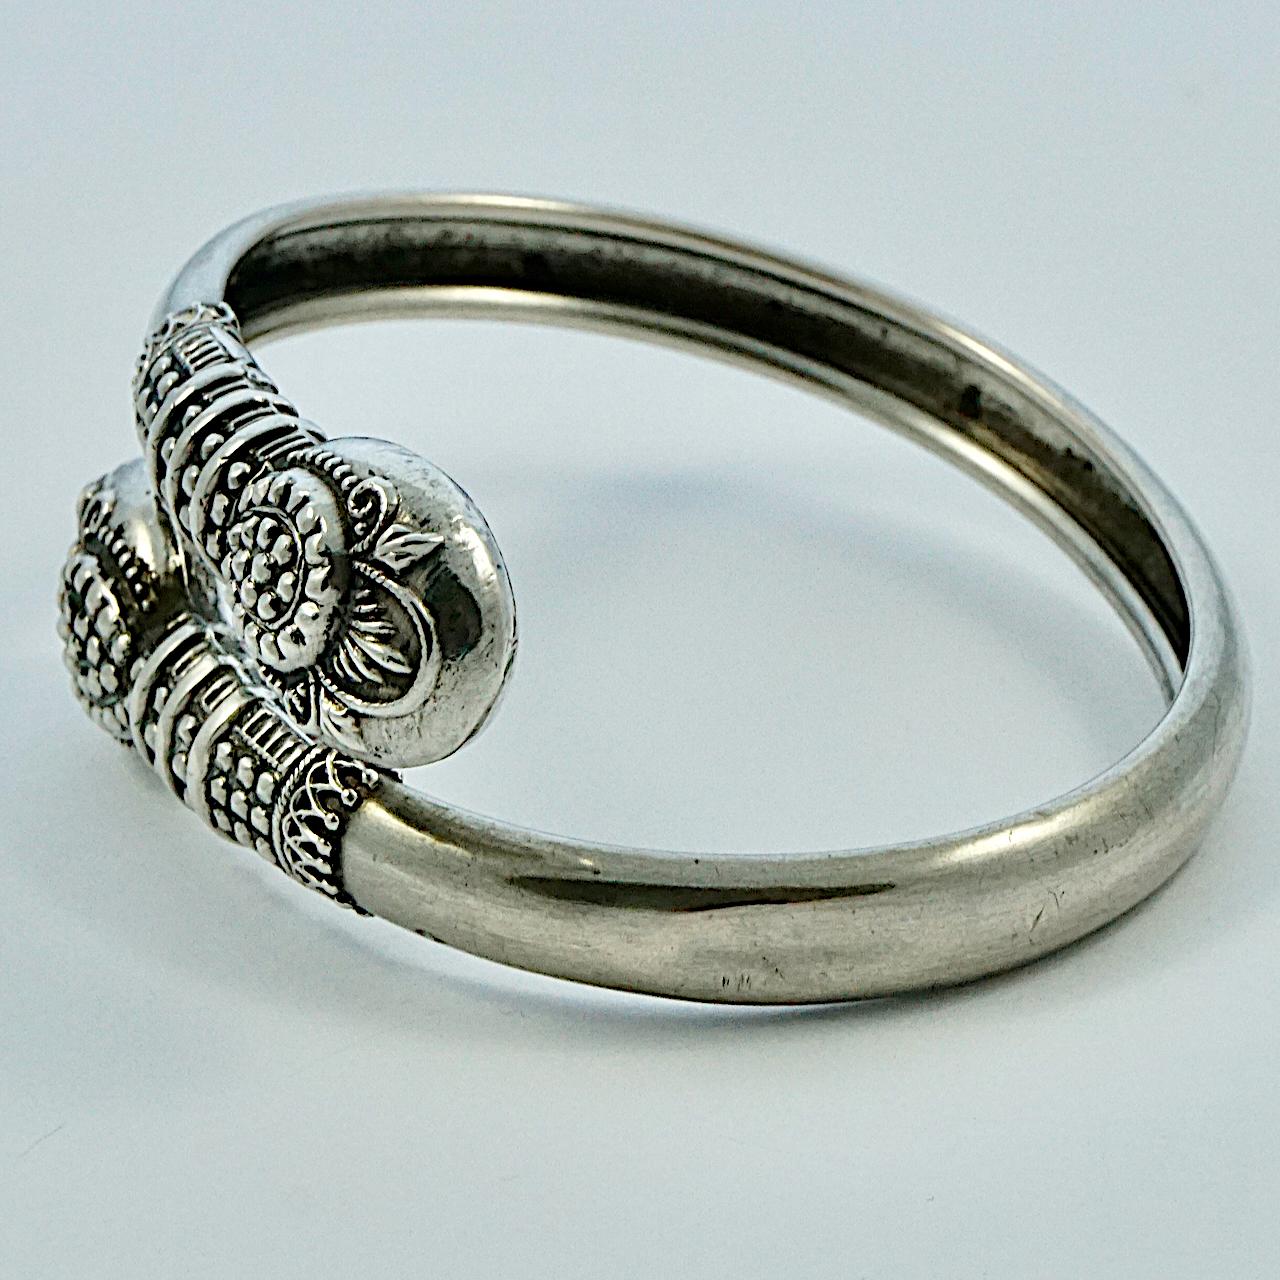 
Beautiful lightweight Victorian silver bangle with ornate decoration. The ornate front pieces test for silver, the band is silver tone. It is slightly oval, the inside measurements are 5.5 cm / 2.1 inches by 4.5 cm / 1.8 inches, and the width is 7